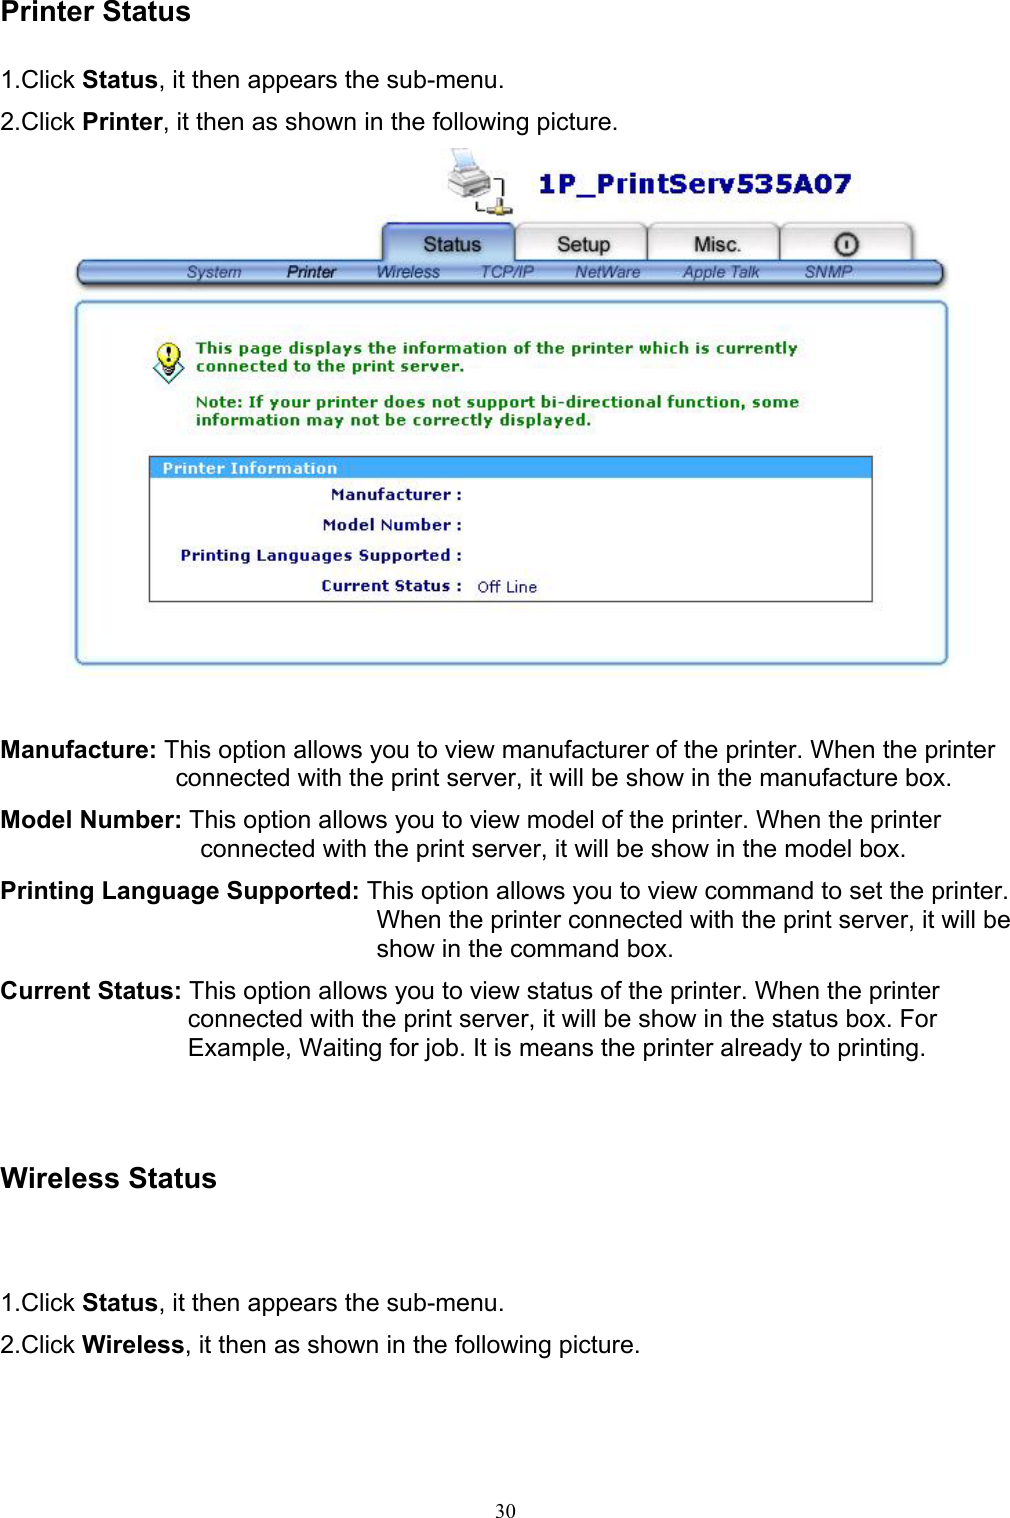   30Printer Status  1.Click Status, it then appears the sub-menu. 2.Click Printer, it then as shown in the following picture.   Manufacture: This option allows you to view manufacturer of the printer. When the printer connected with the print server, it will be show in the manufacture box. Model Number: This option allows you to view model of the printer. When the printer connected with the print server, it will be show in the model box. Printing Language Supported: This option allows you to view command to set the printer. When the printer connected with the print server, it will be show in the command box. Current Status: This option allows you to view status of the printer. When the printer connected with the print server, it will be show in the status box. For Example, Waiting for job. It is means the printer already to printing.    Wireless Status  1.Click Status, it then appears the sub-menu. 2.Click Wireless, it then as shown in the following picture.  